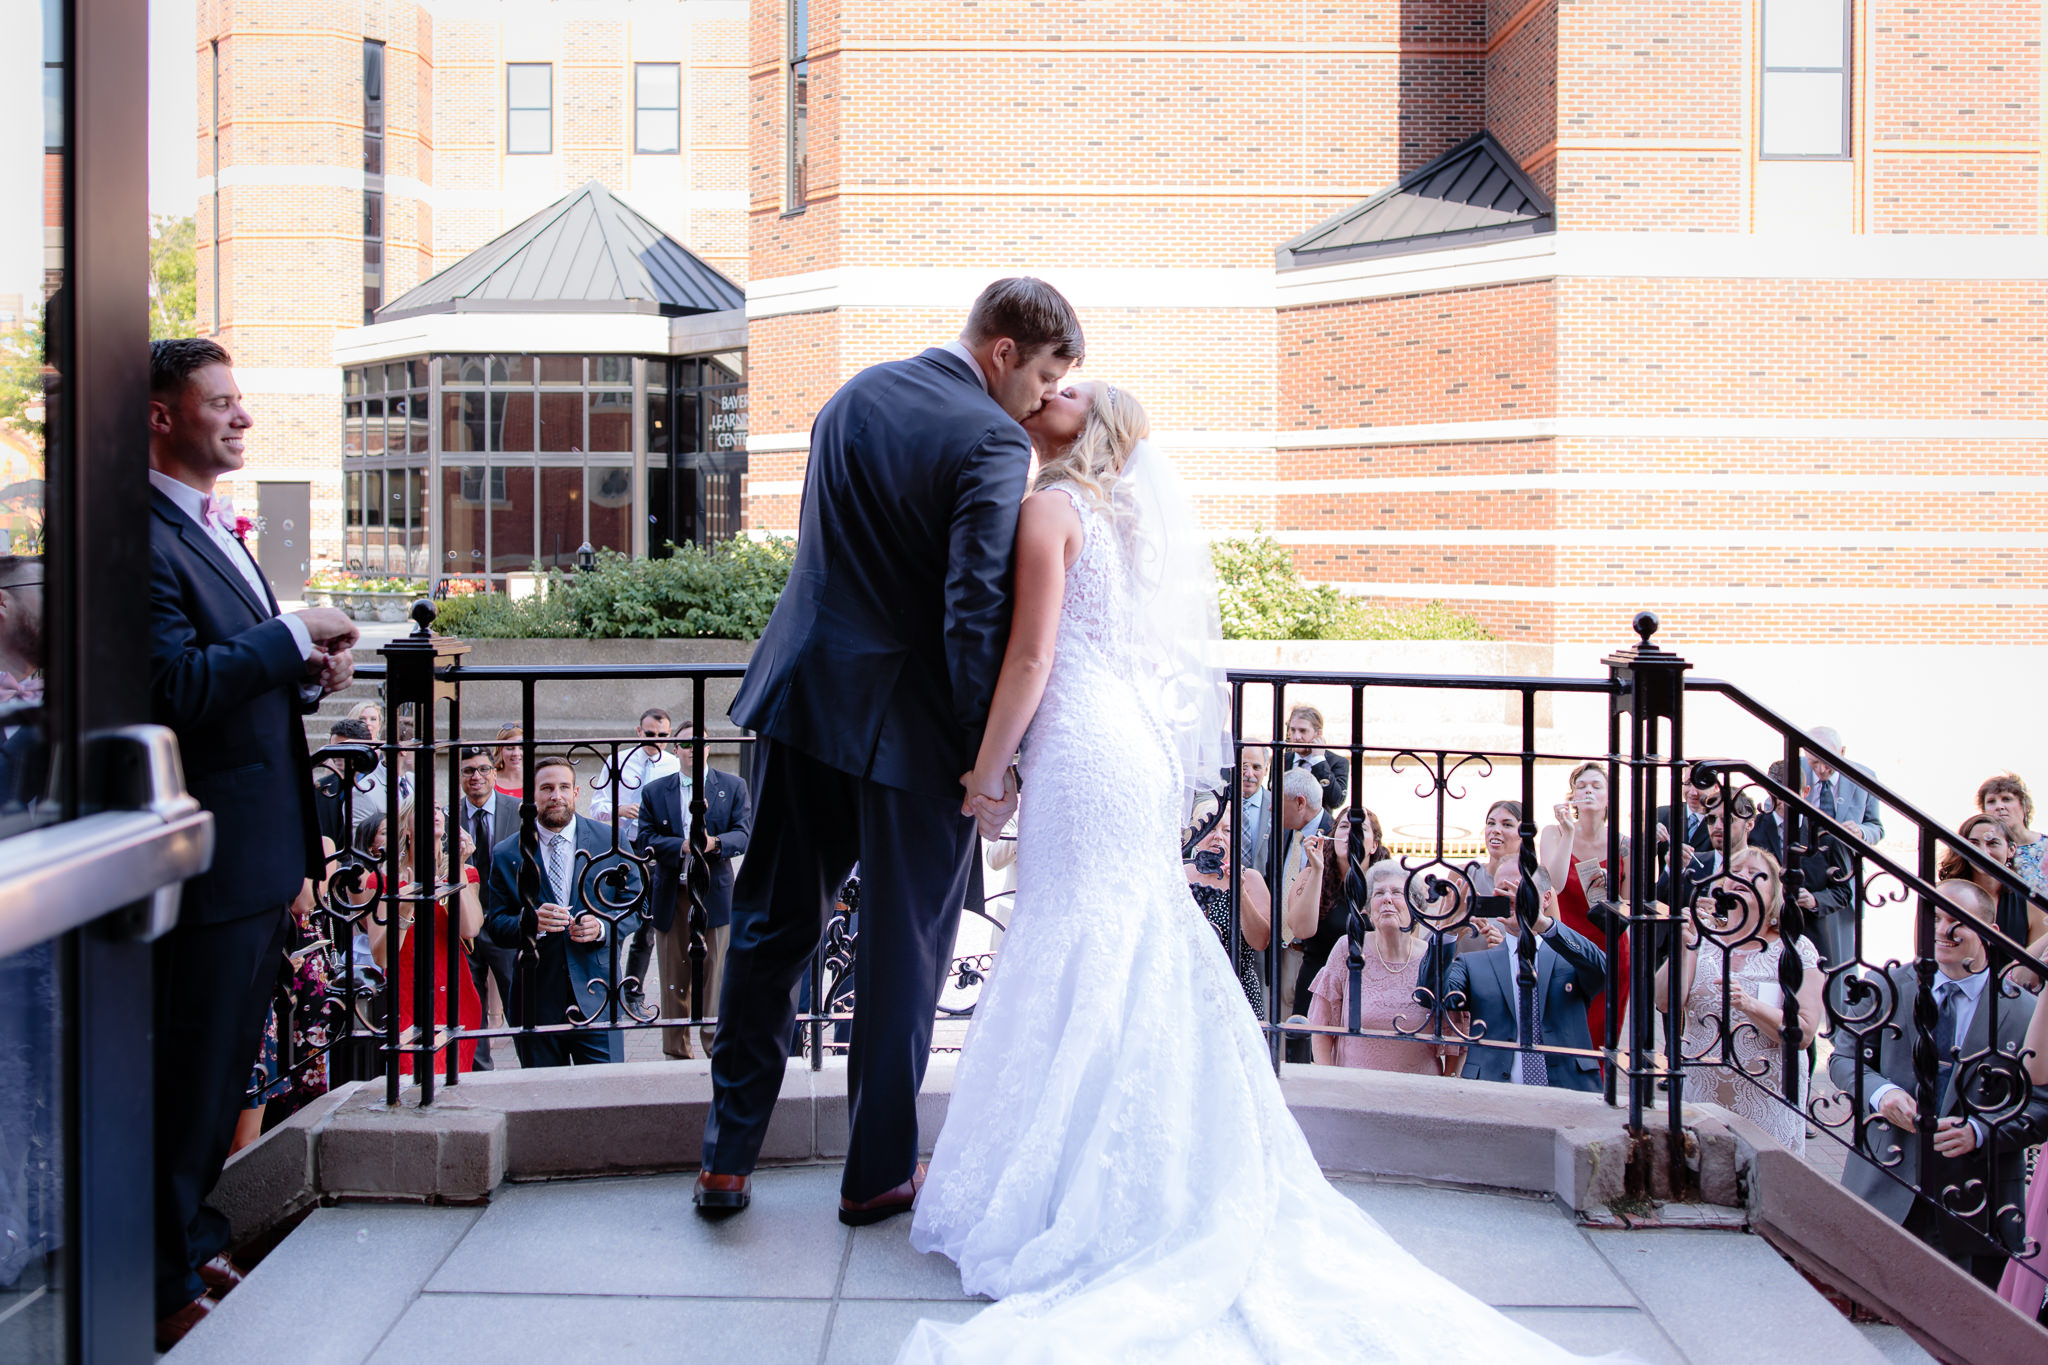 Newlyweds kiss during bubble exit at Duquesne University